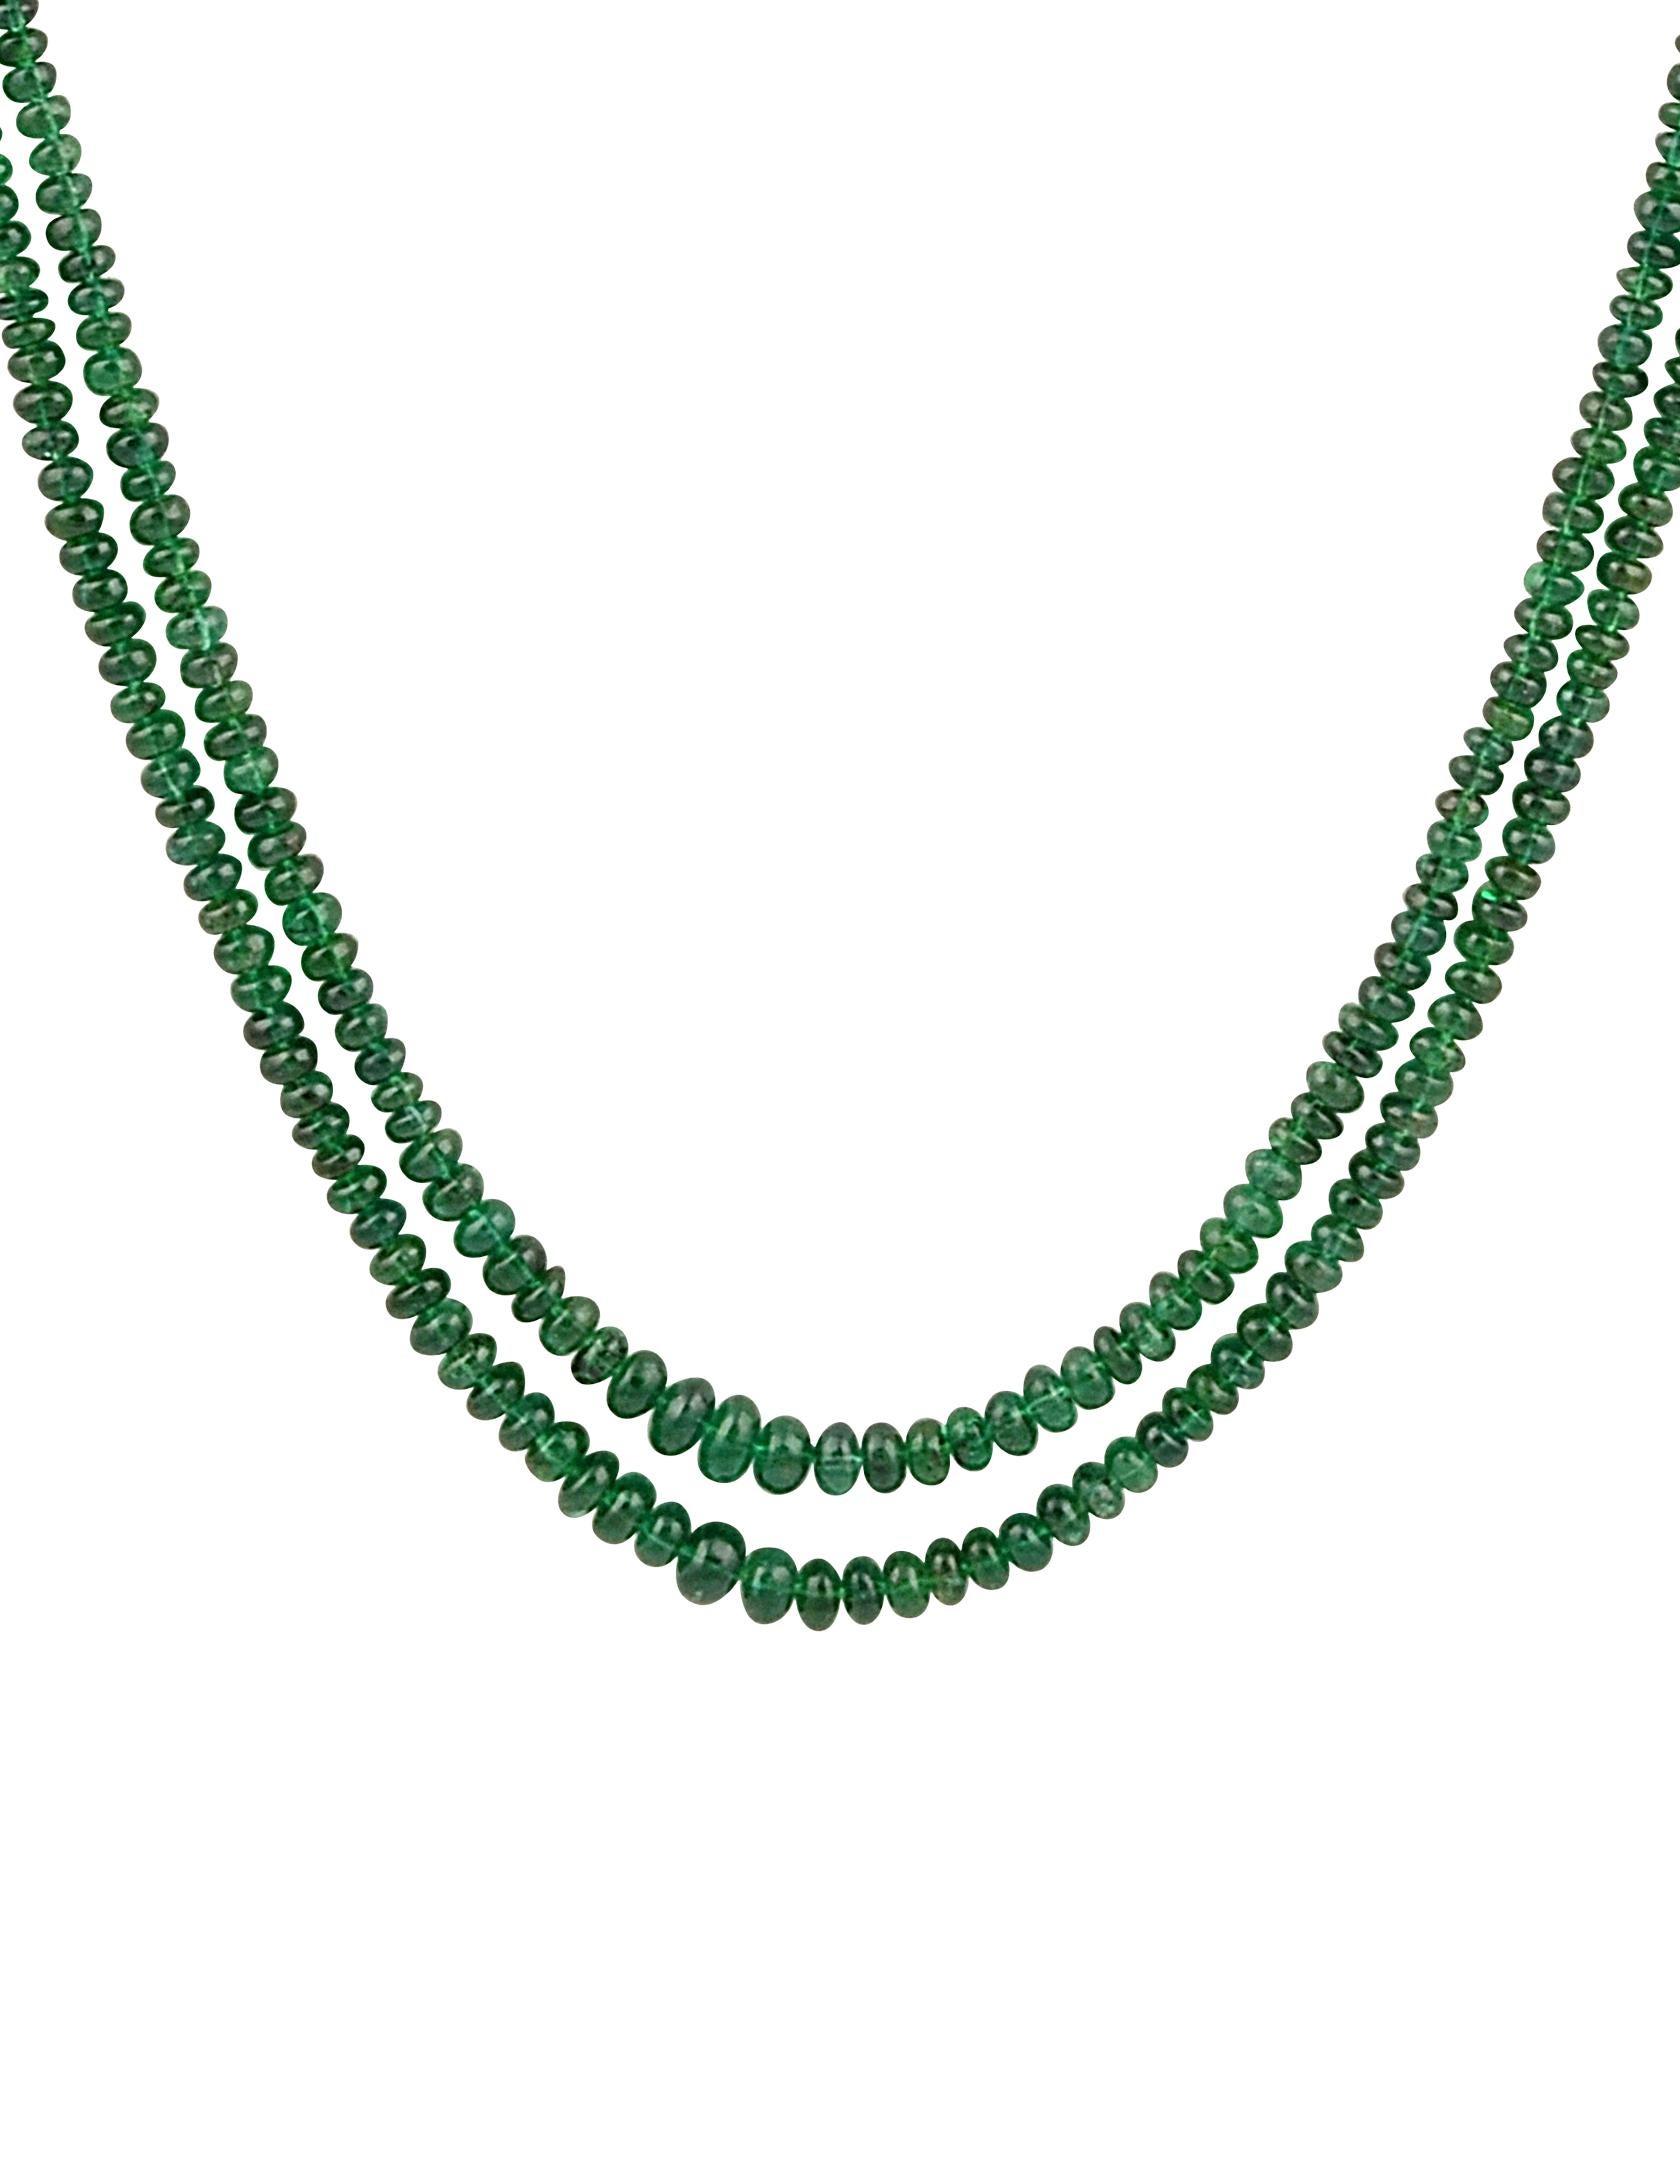 125ct Fine Emerald Beads 2 Line Necklace with 14 Kt Yellow Gold Clasp Adjustable 11